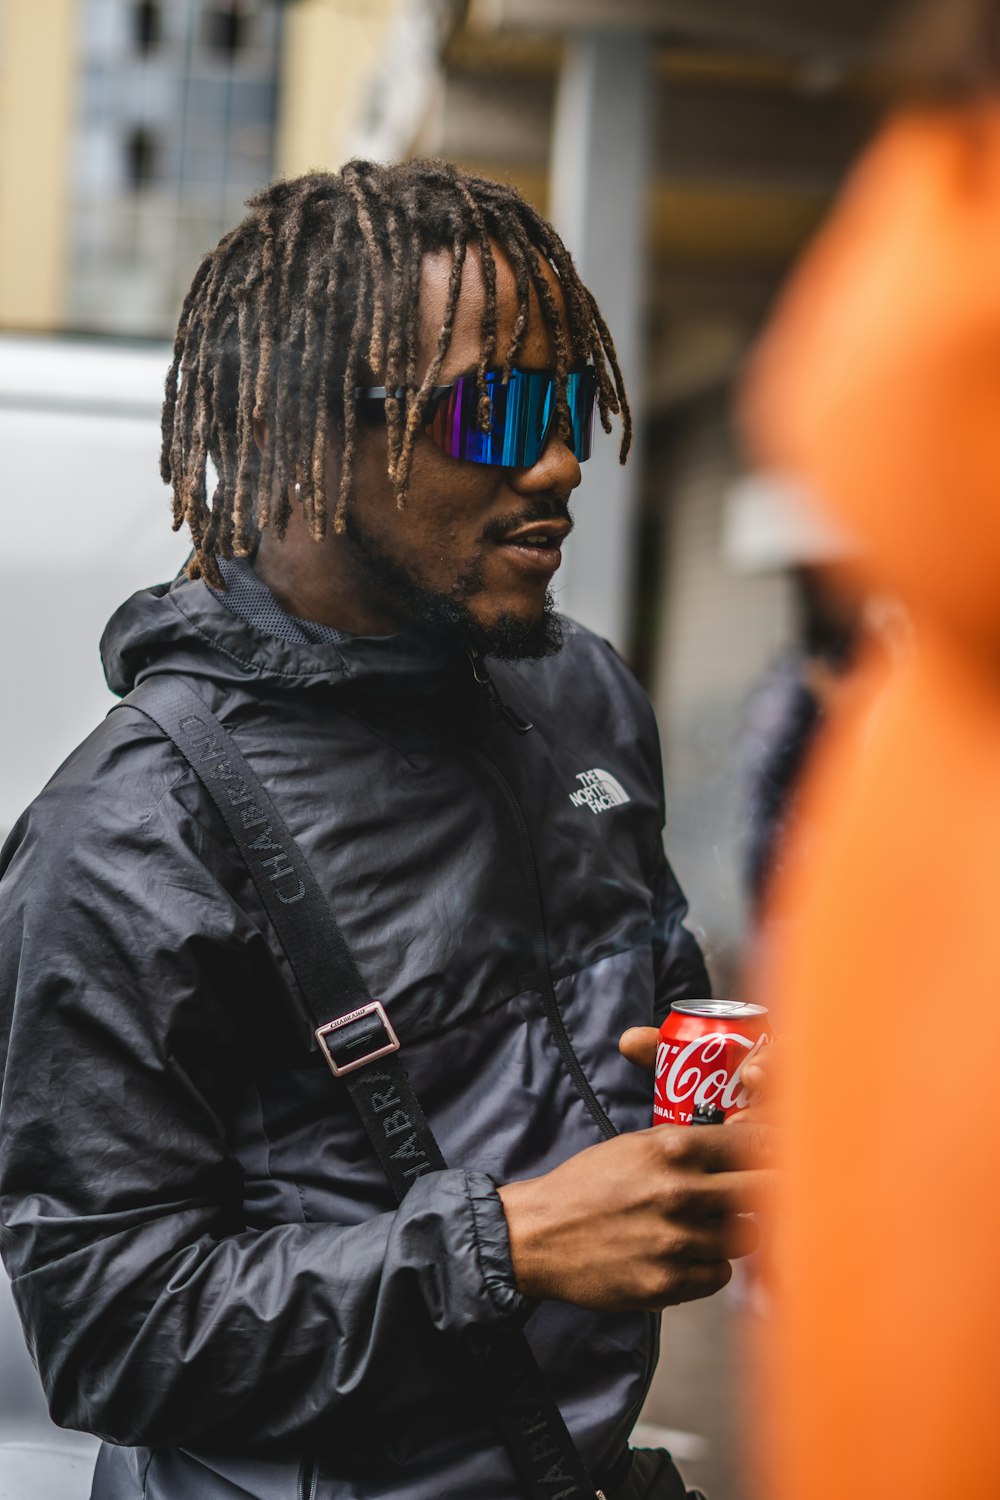 a man with dreadlocks holding a can of coke